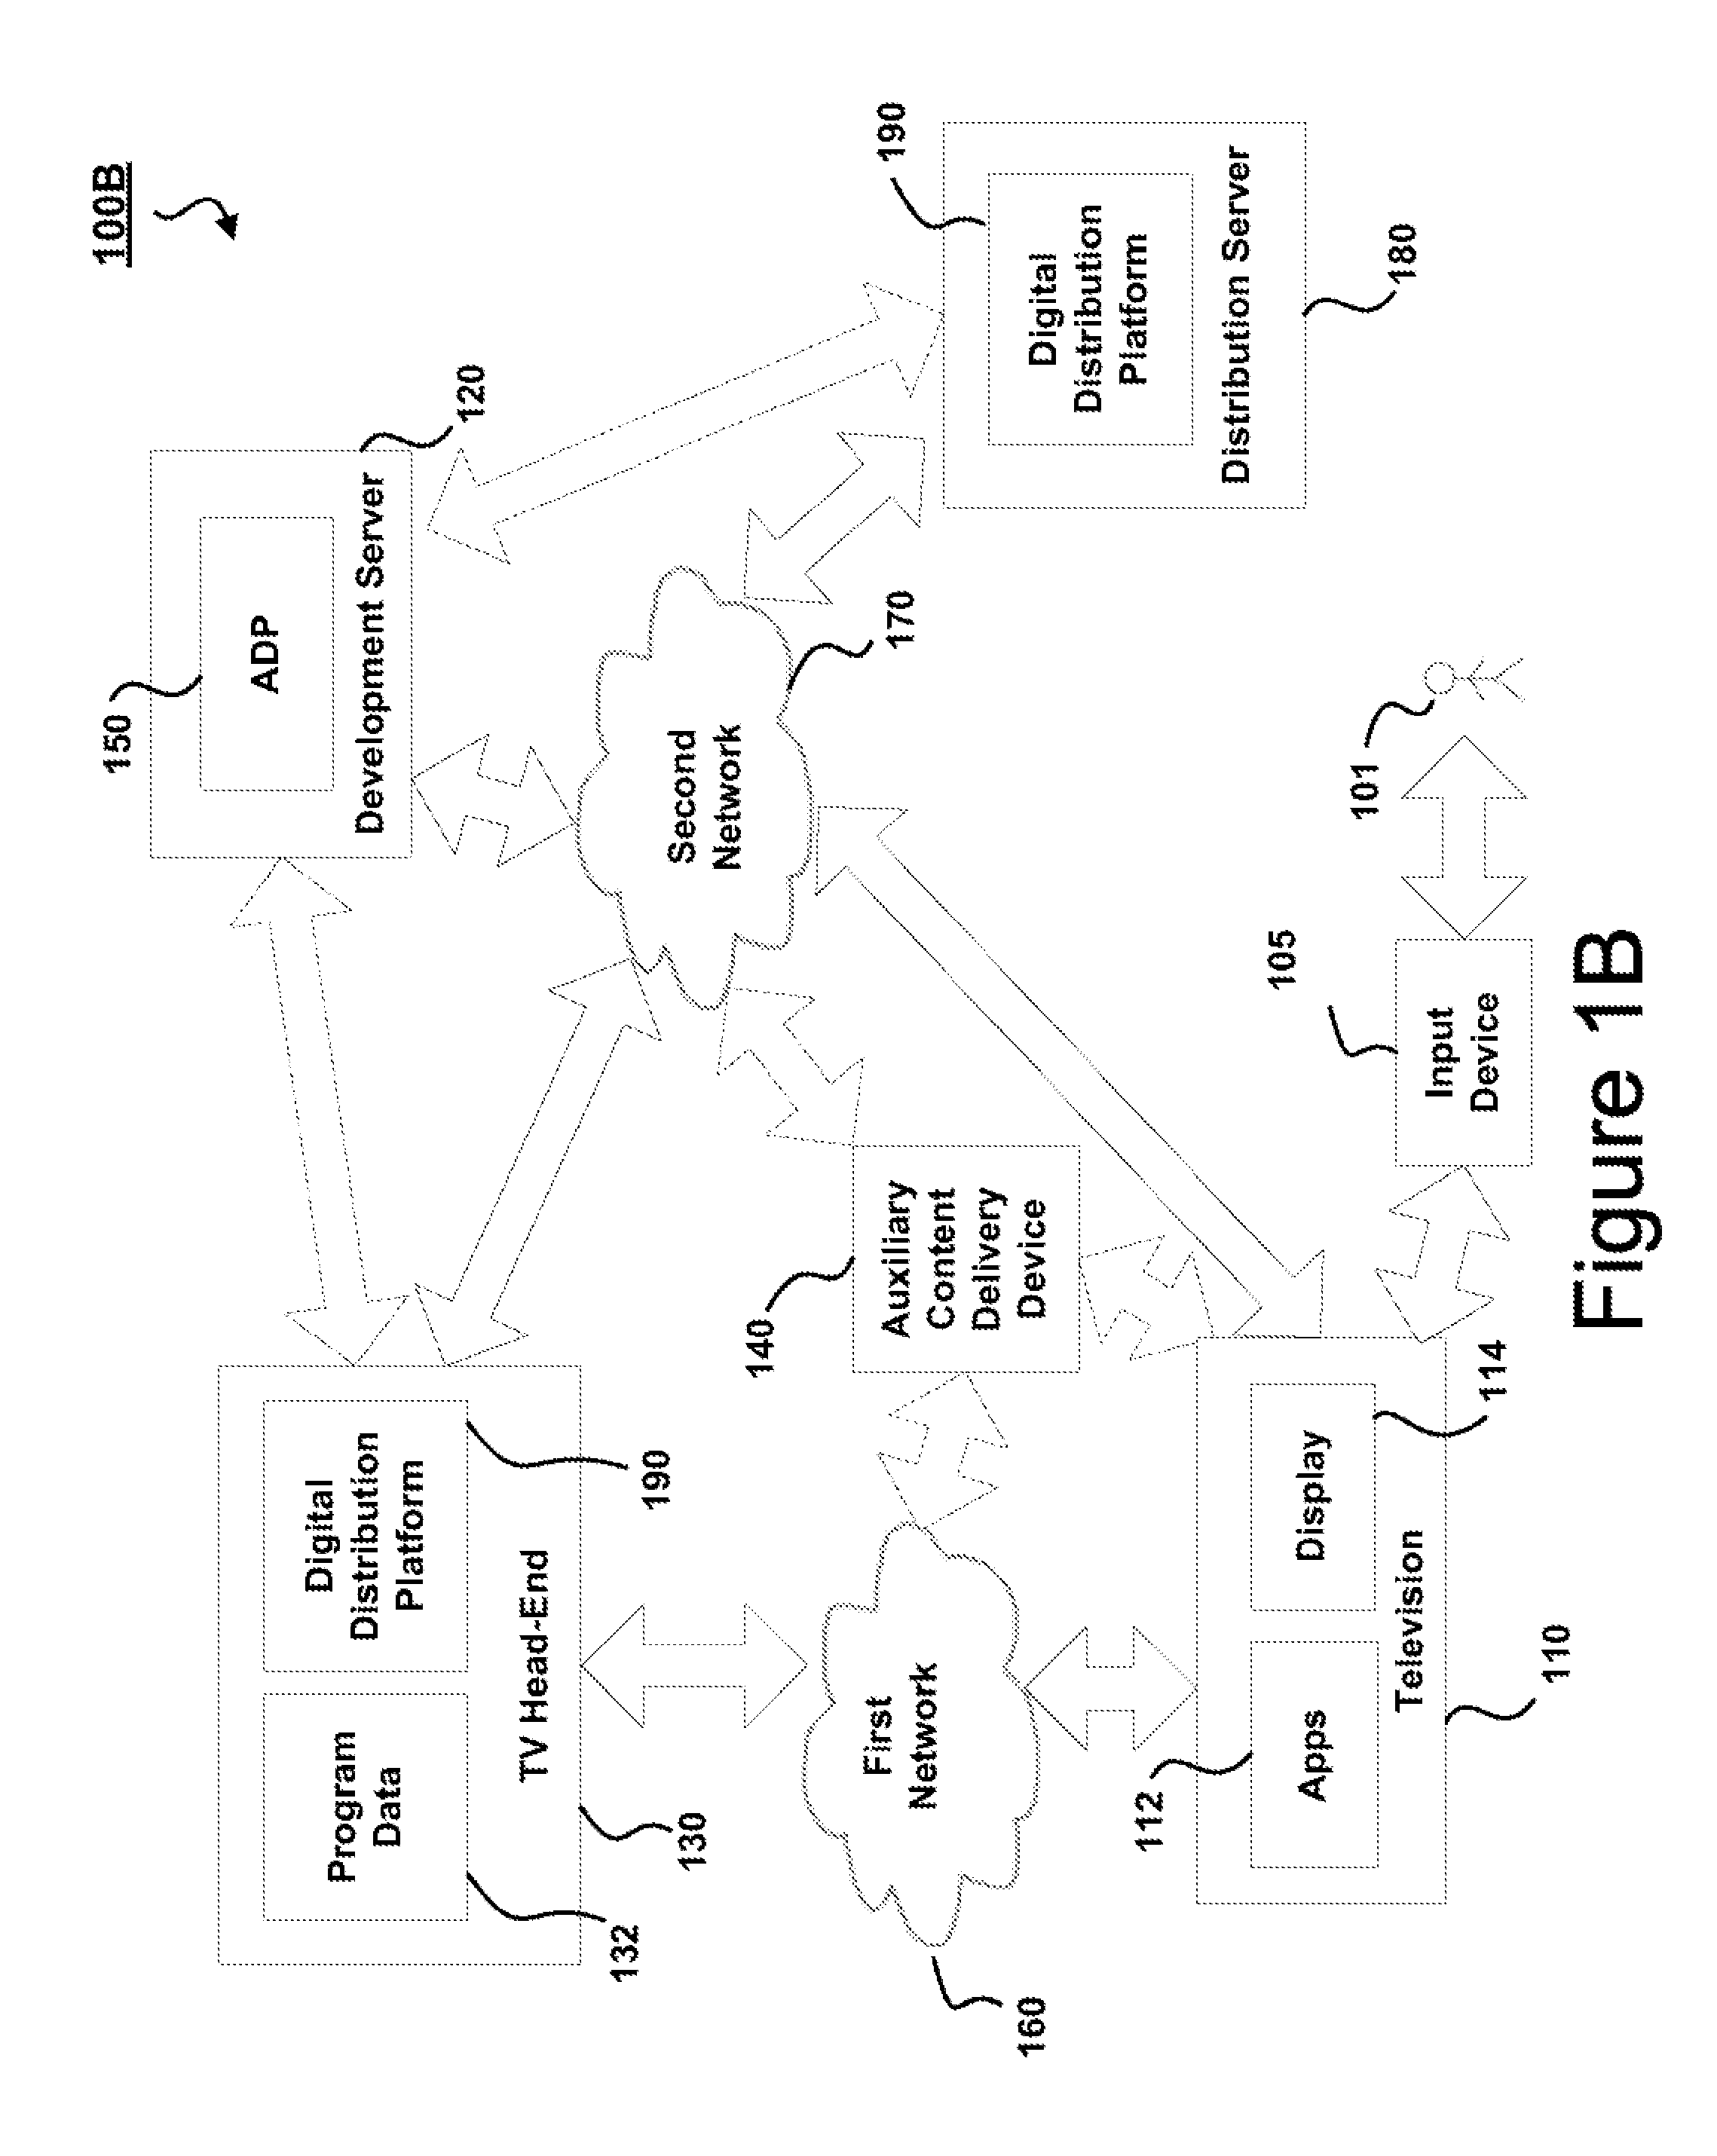 Systems and methods for a television and set-top box application development and deployment platform